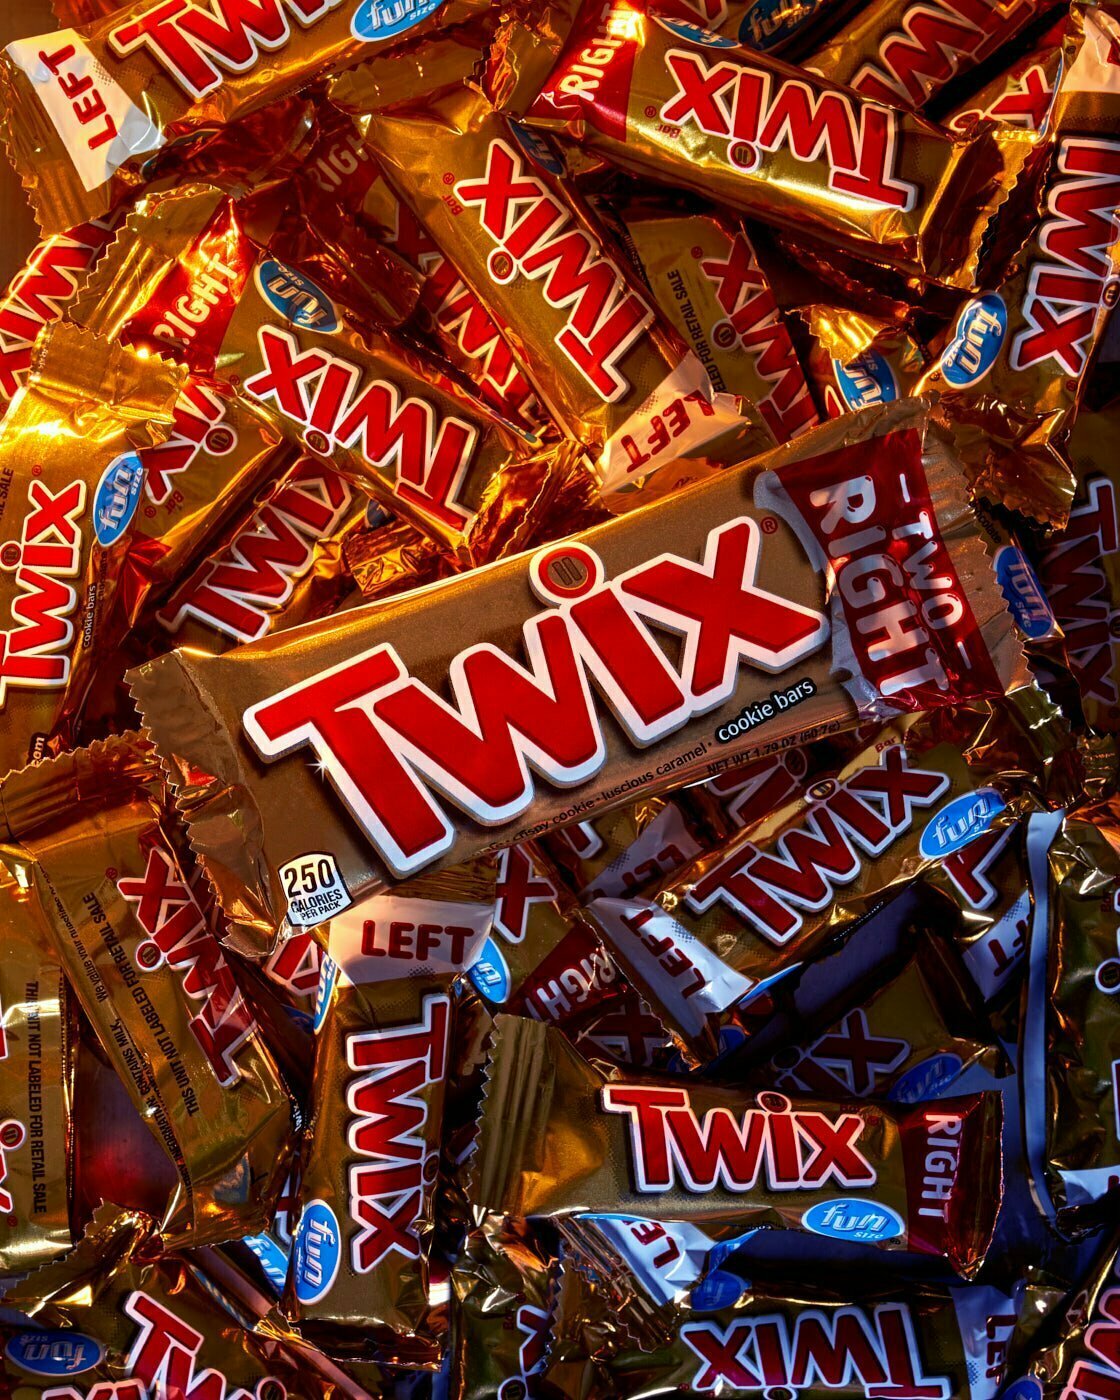 A full size Twix candy bar still in wrapper sitting on top of mini twix candy bars also still in their wrappers.